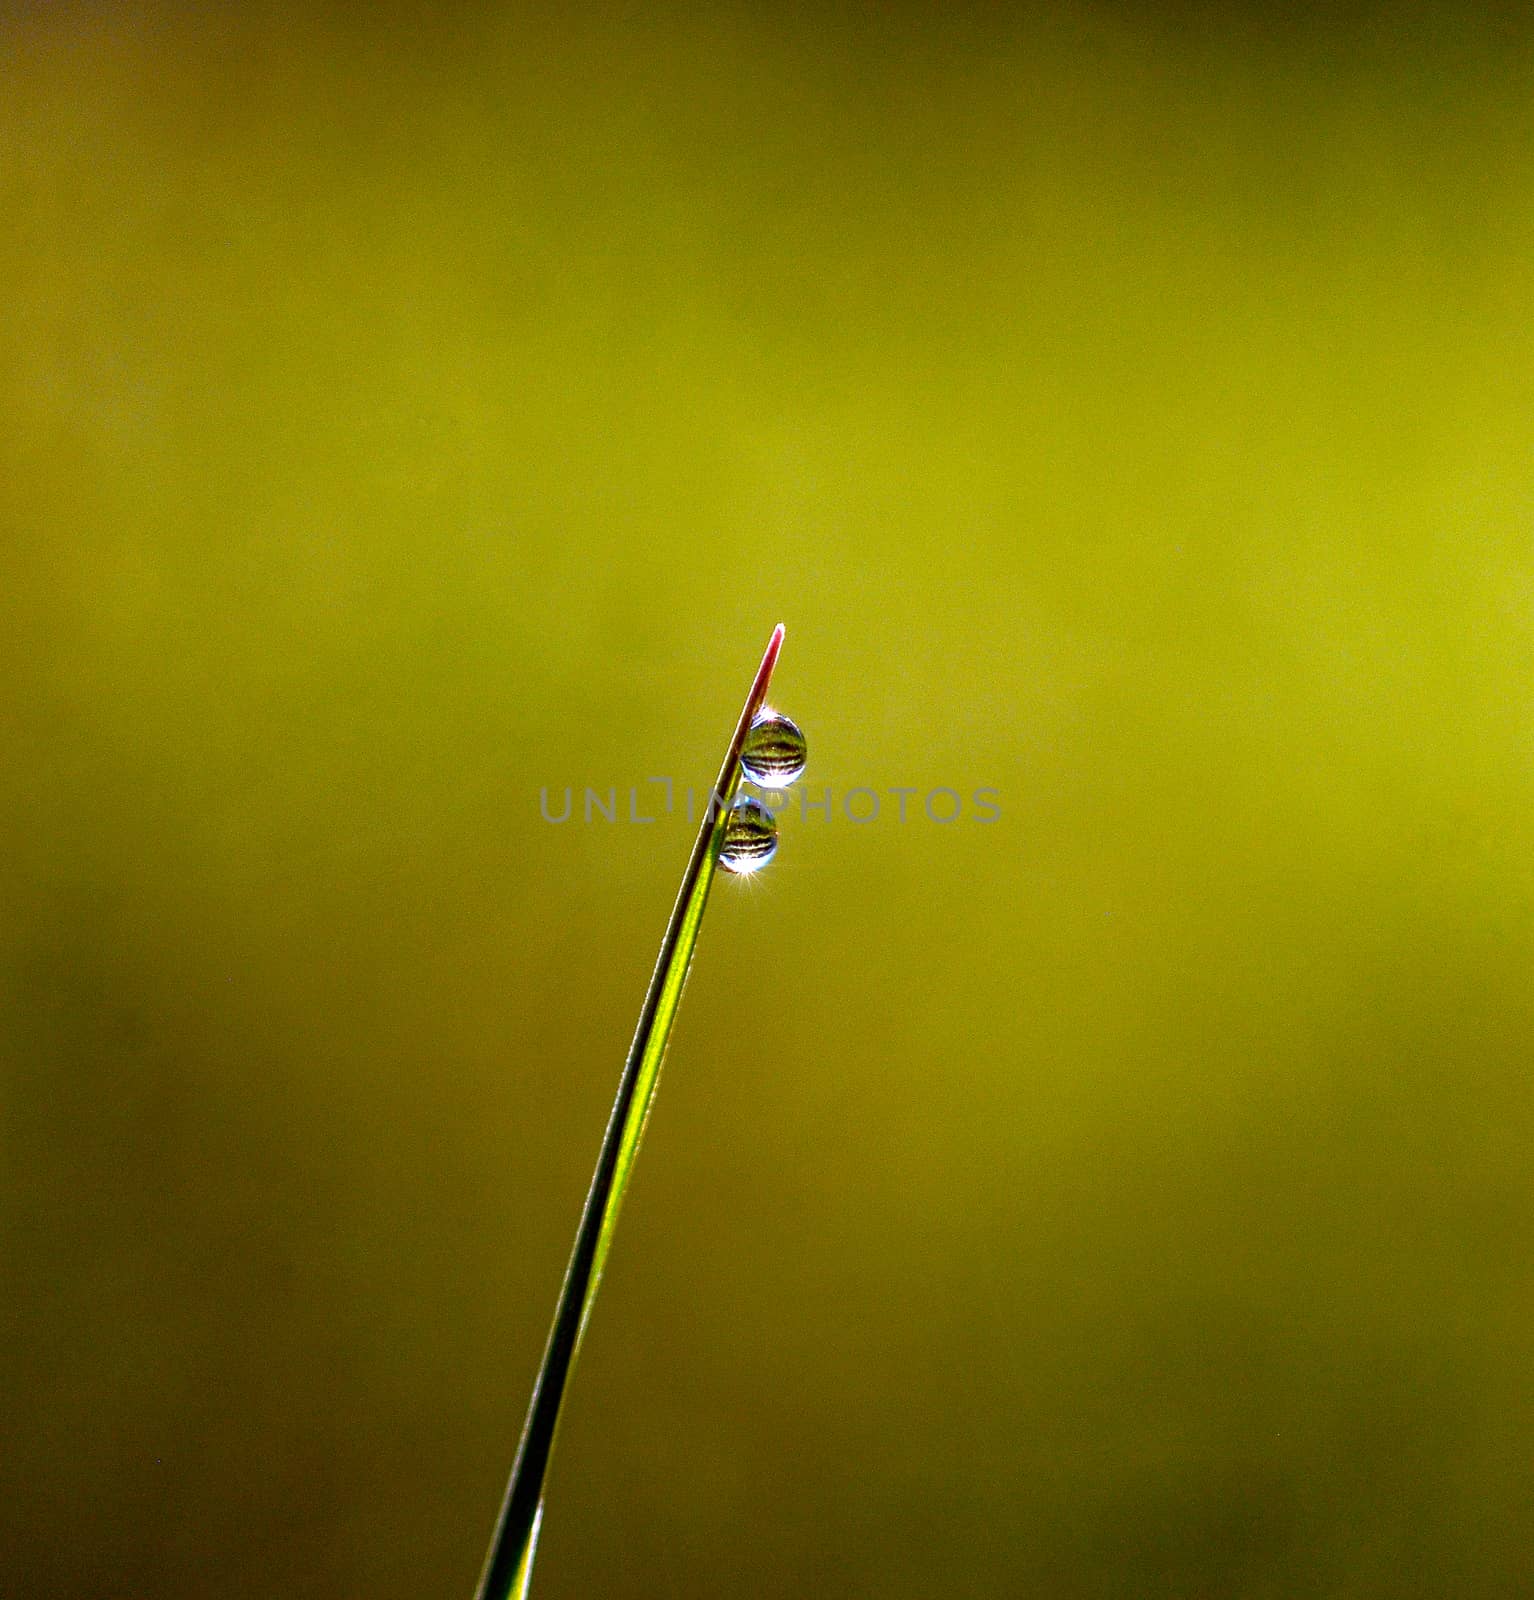 Picture of a Morning dew on blades of grass during sunrise